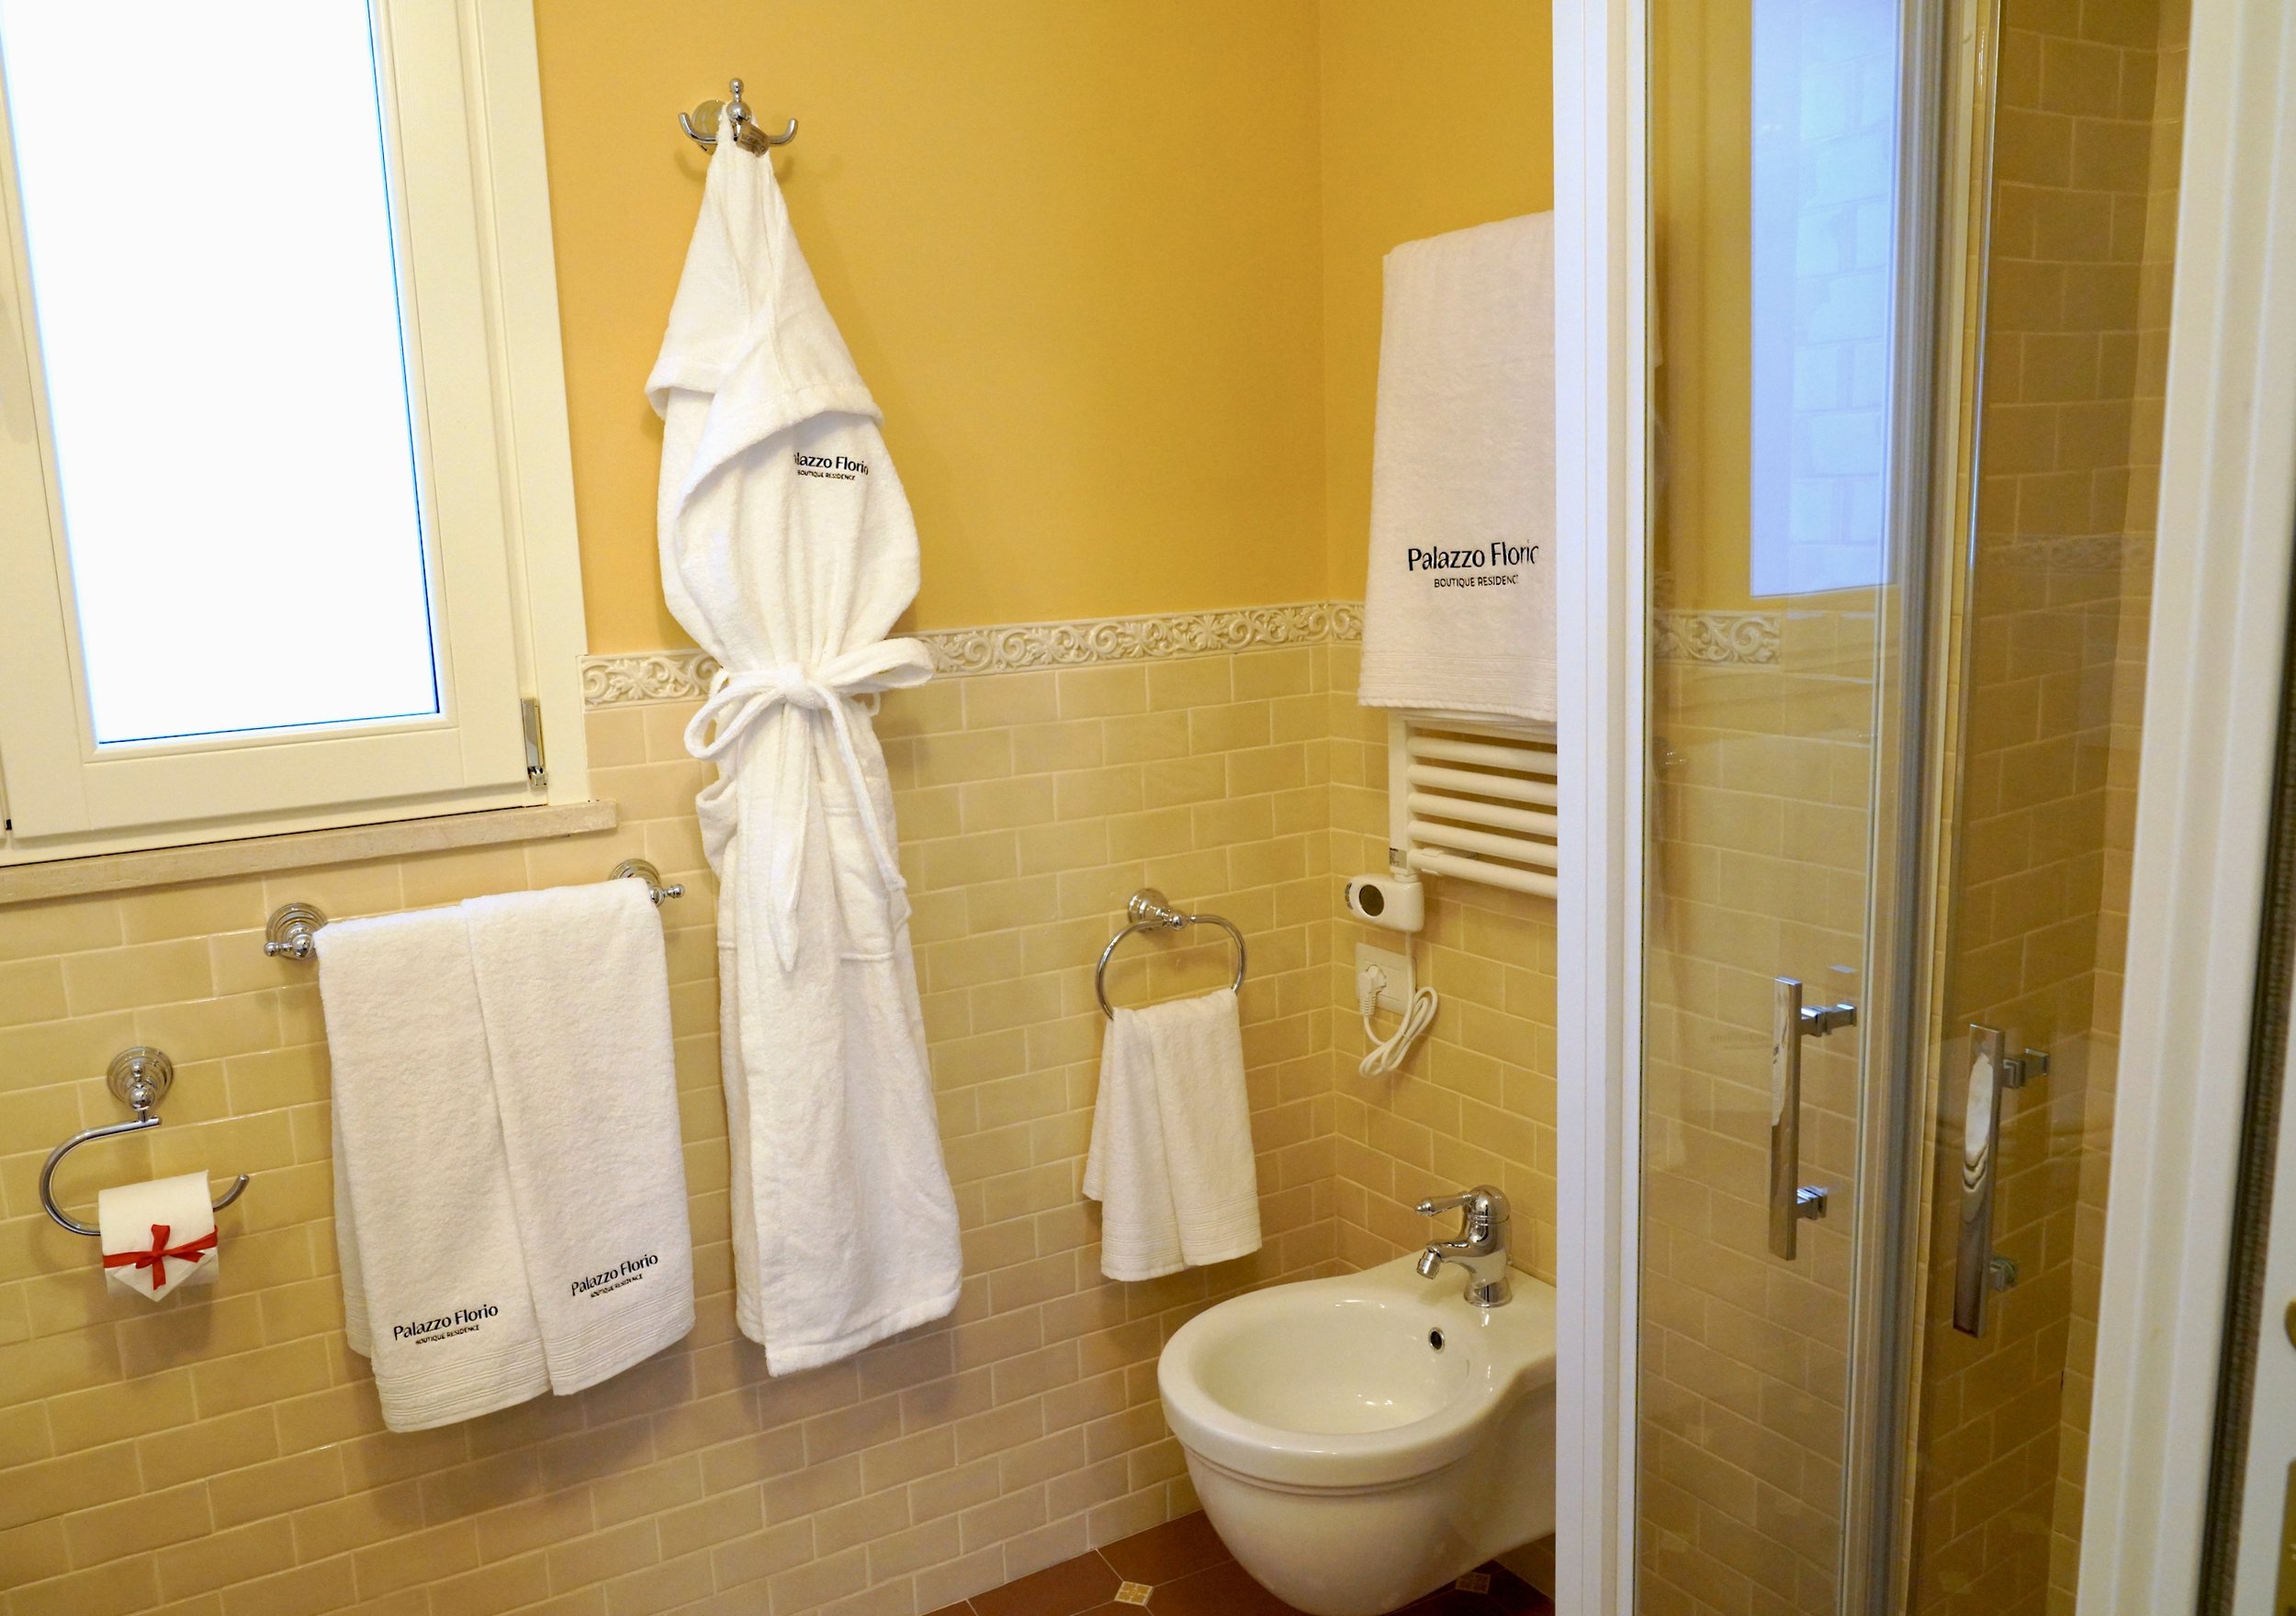 Shower area and embroidered towels